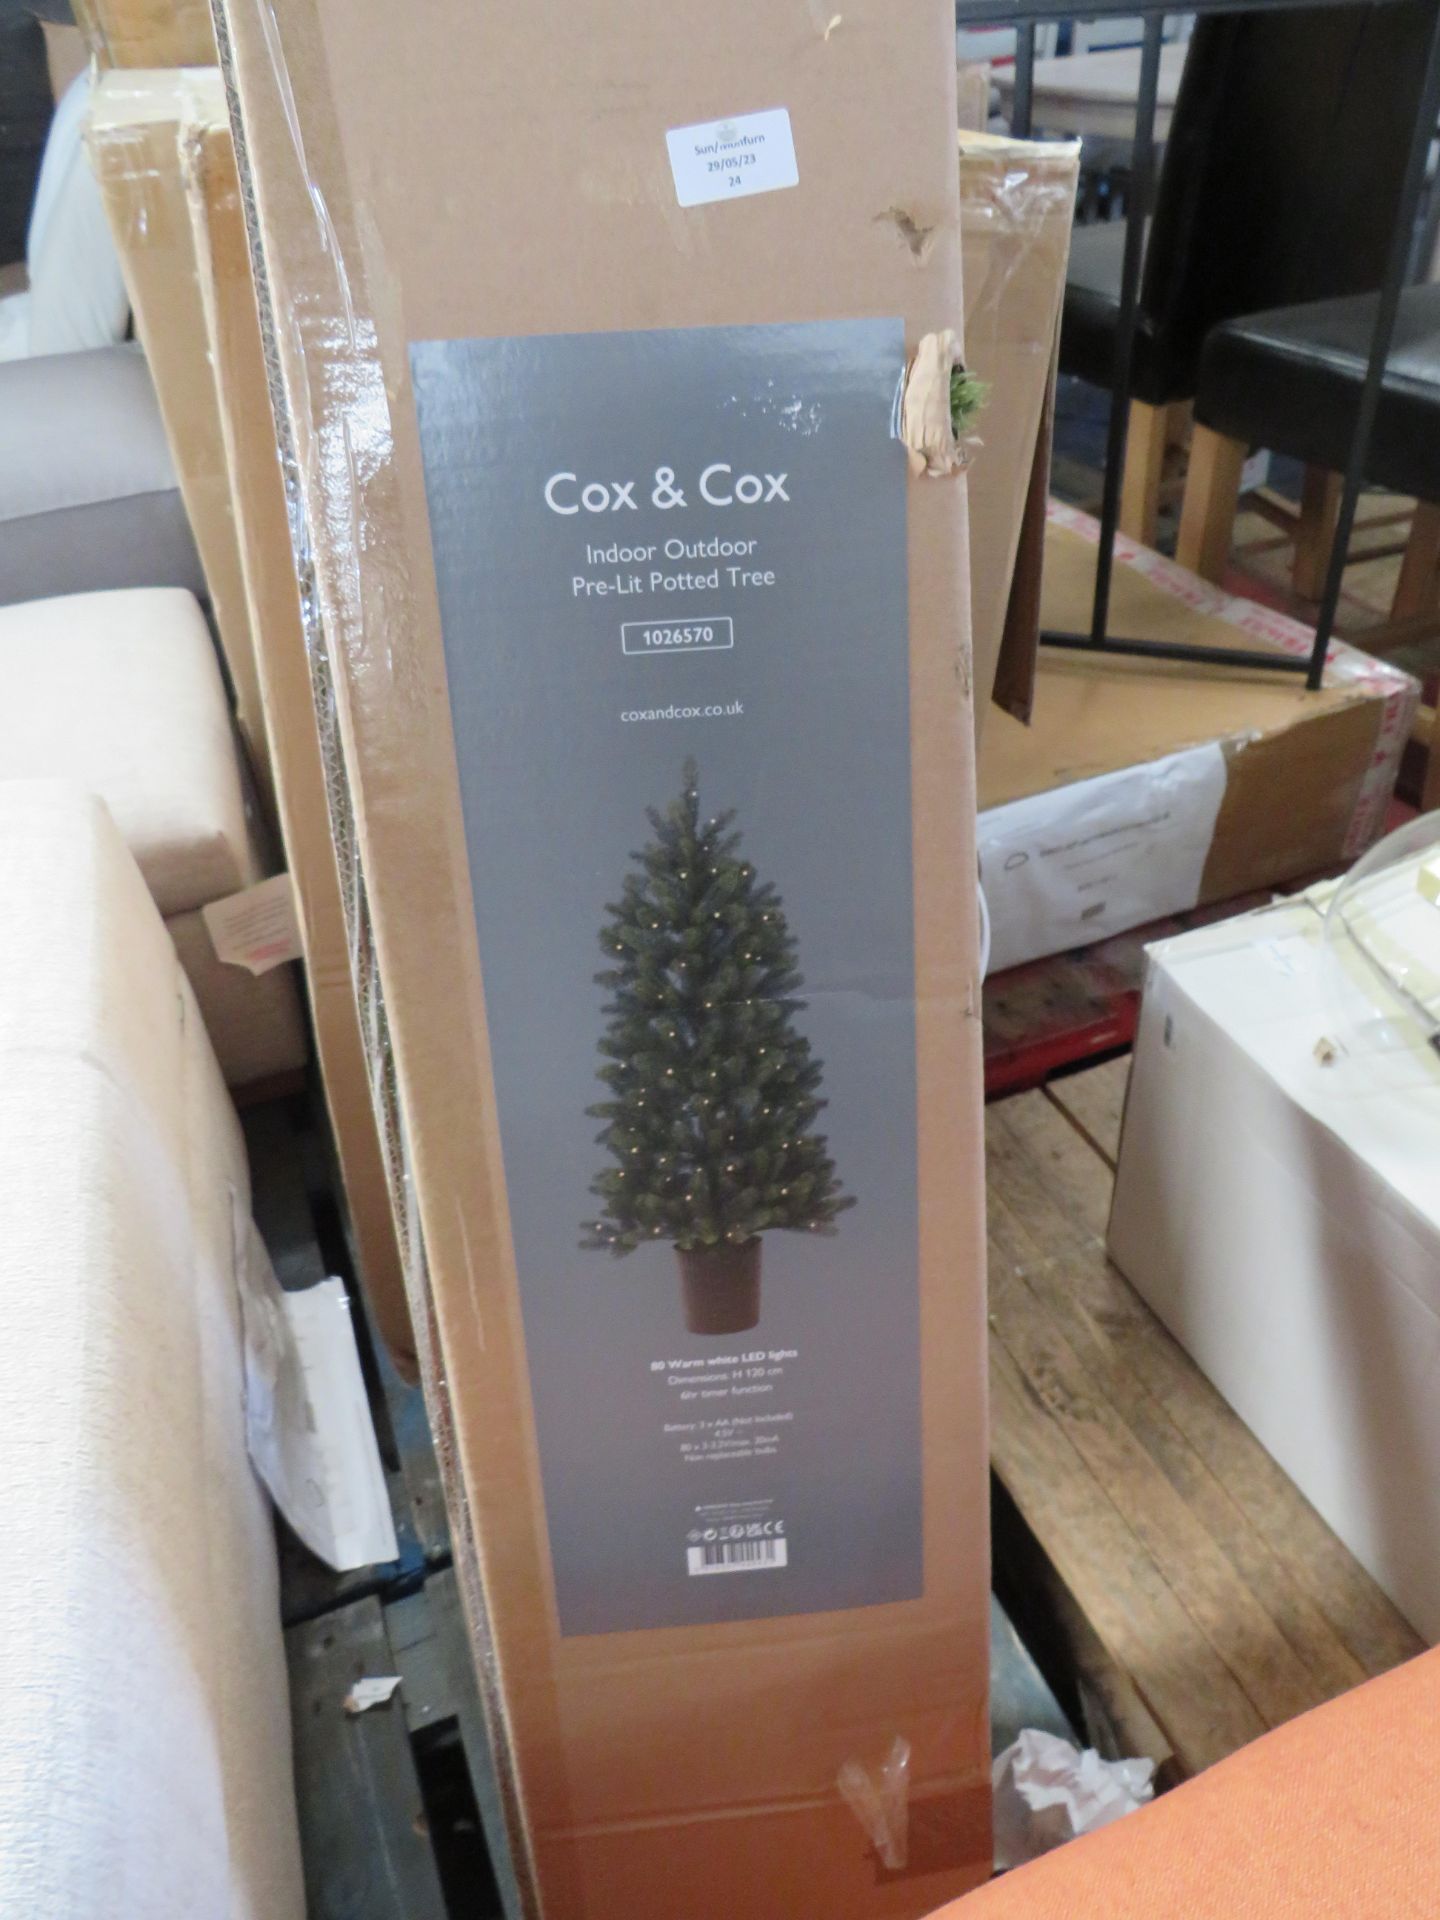 Cox & Cox Indoor Outdoor Pre-Light Potted Tree - Unchecked & Boxed.